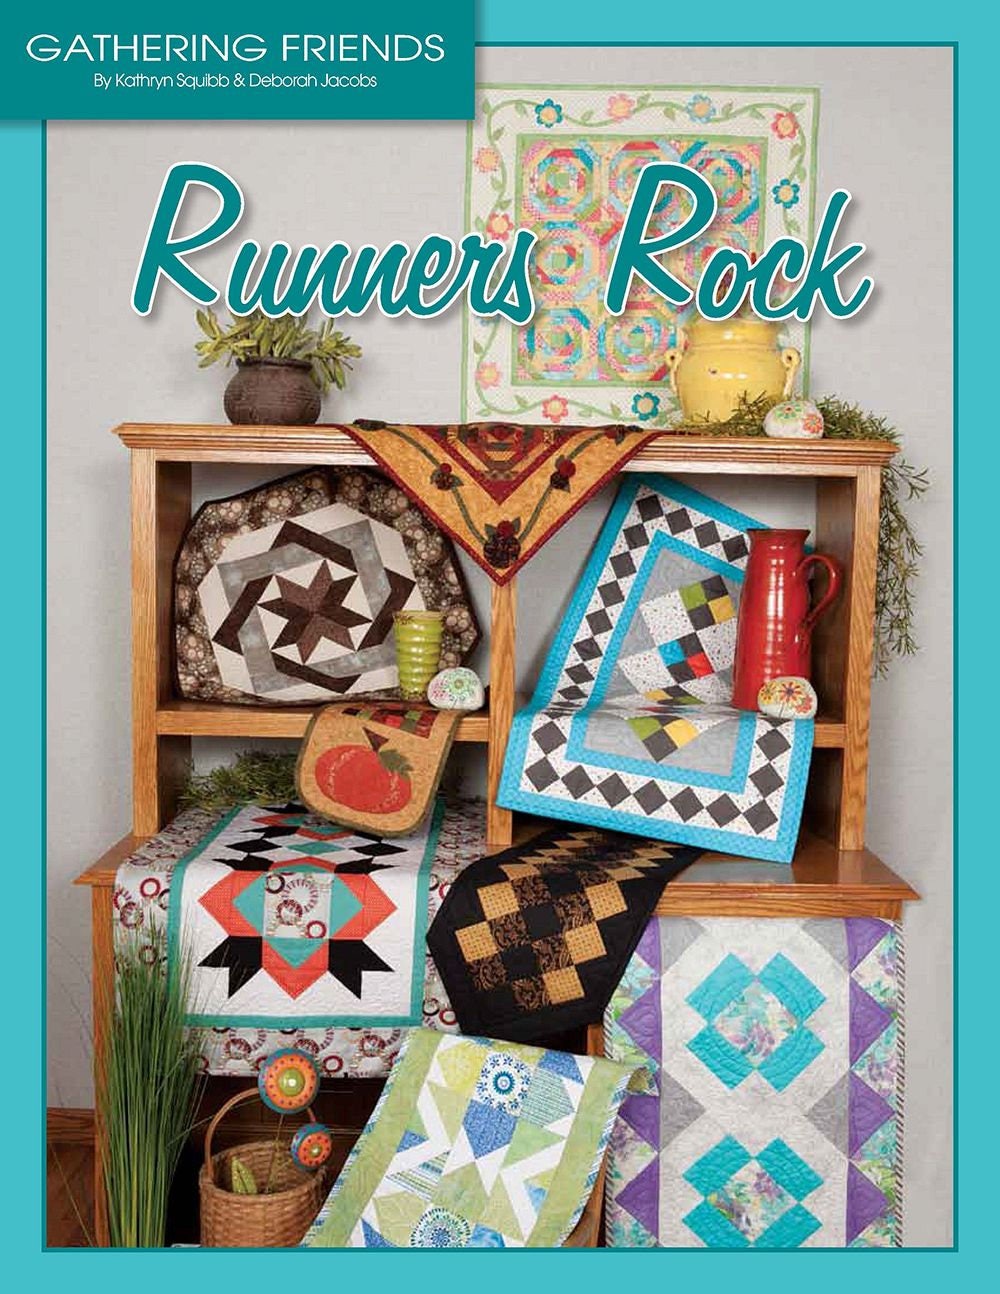 Runners Rock Quilt Pattern Book by Kathryn Squibb of Gathering Friends